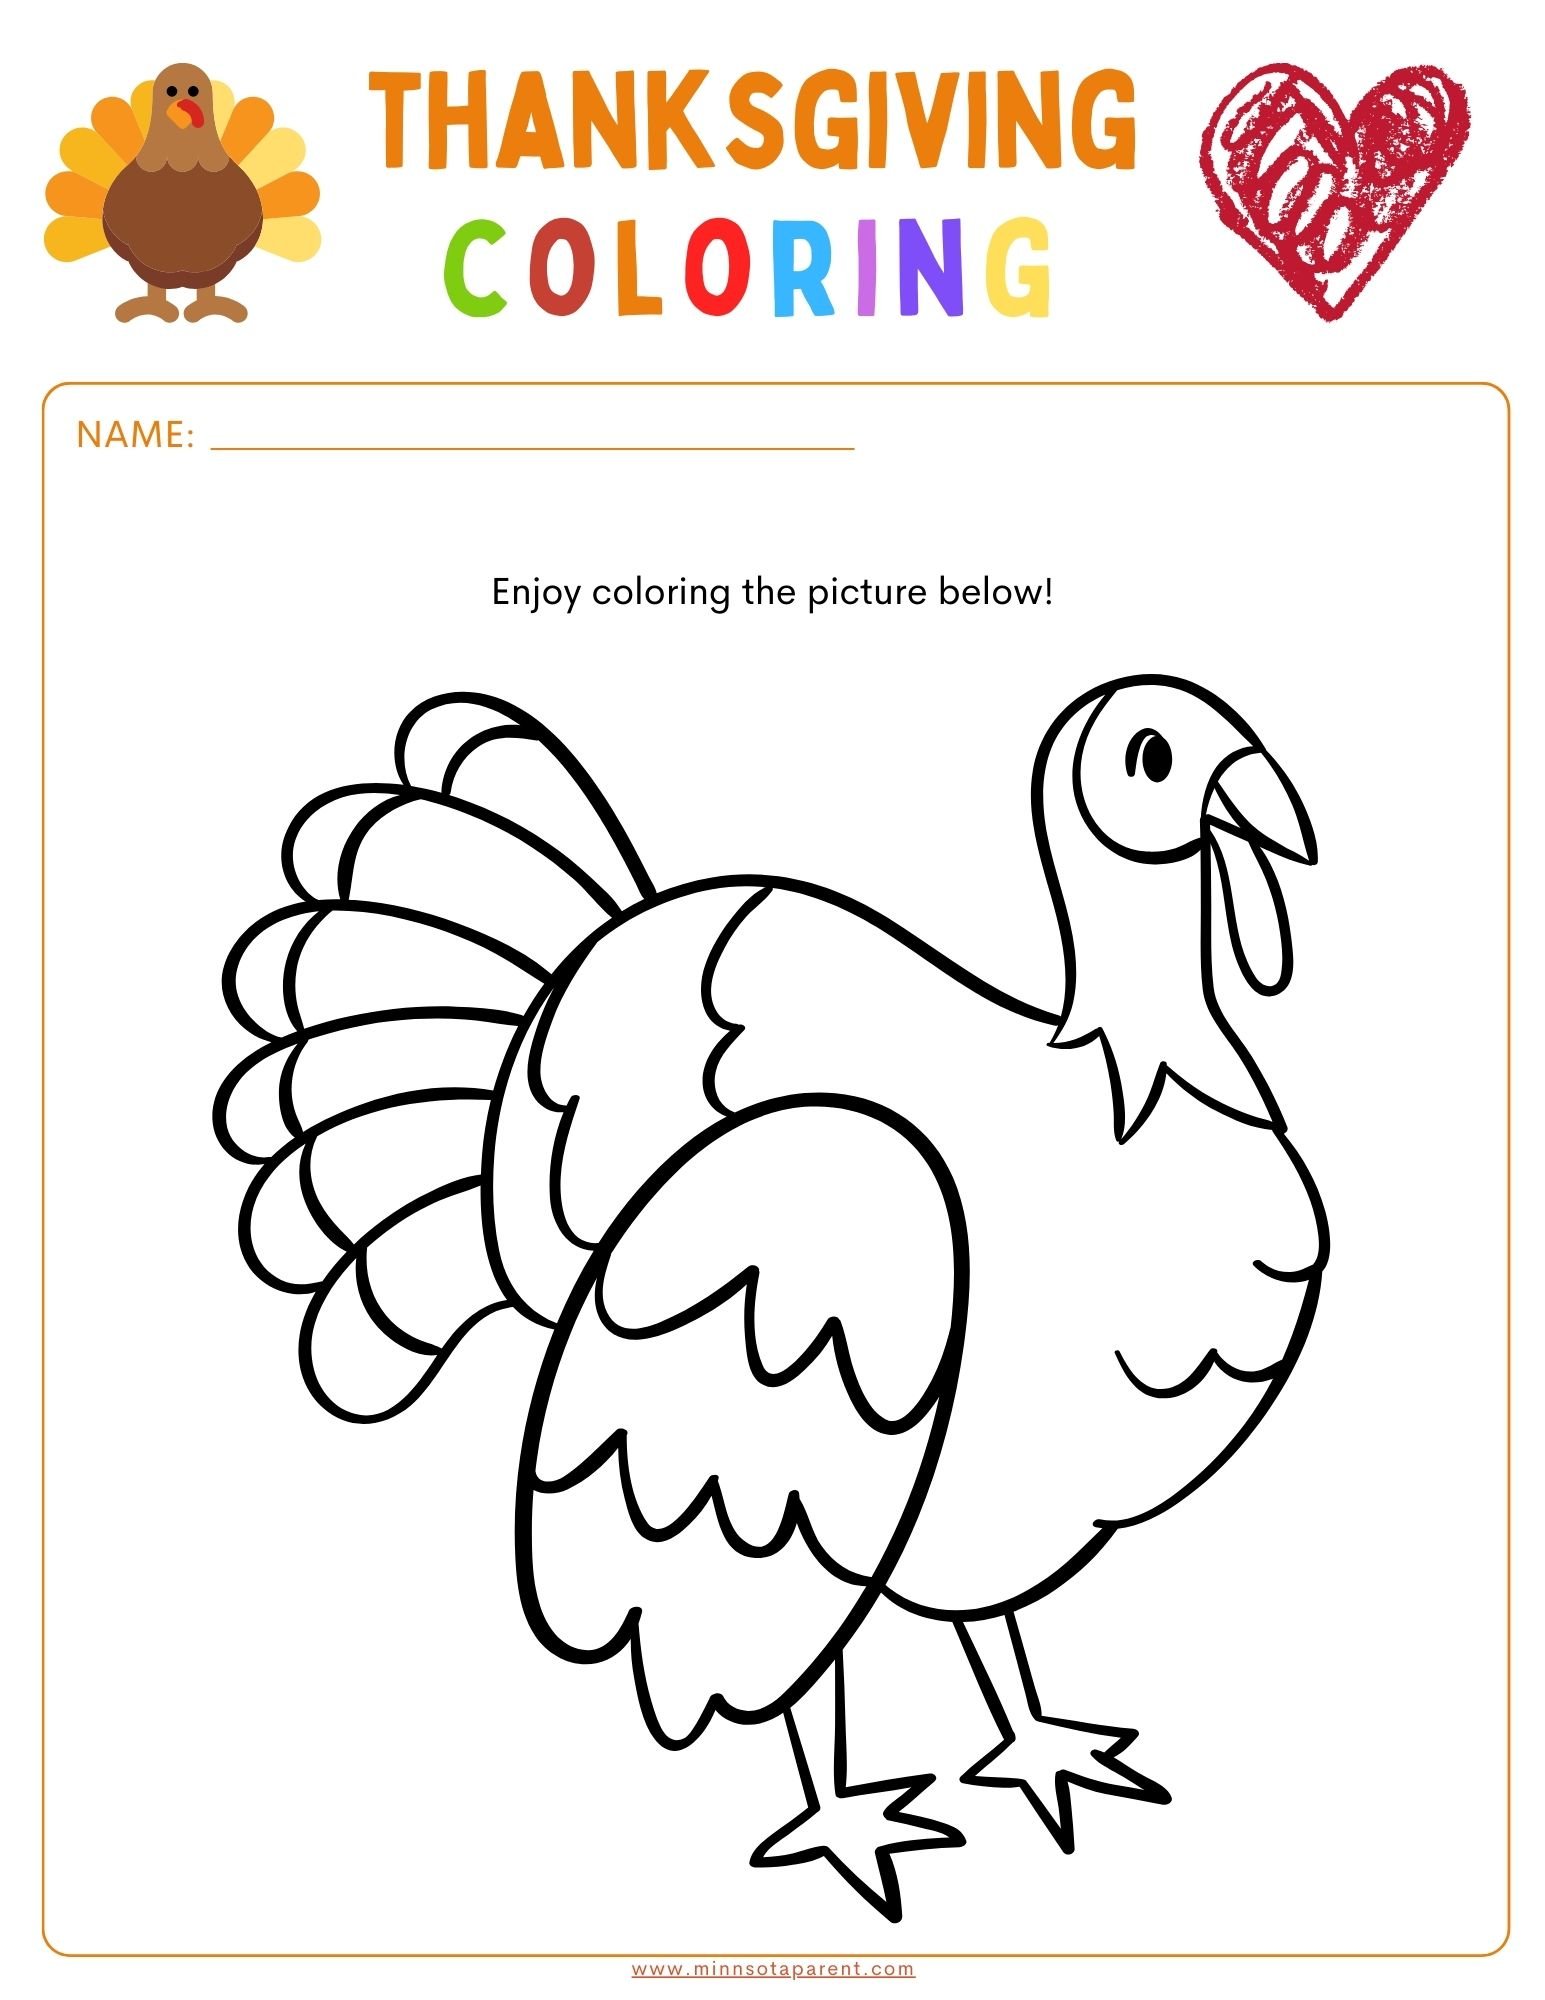 Thanksgiving printables and activity pages for kids